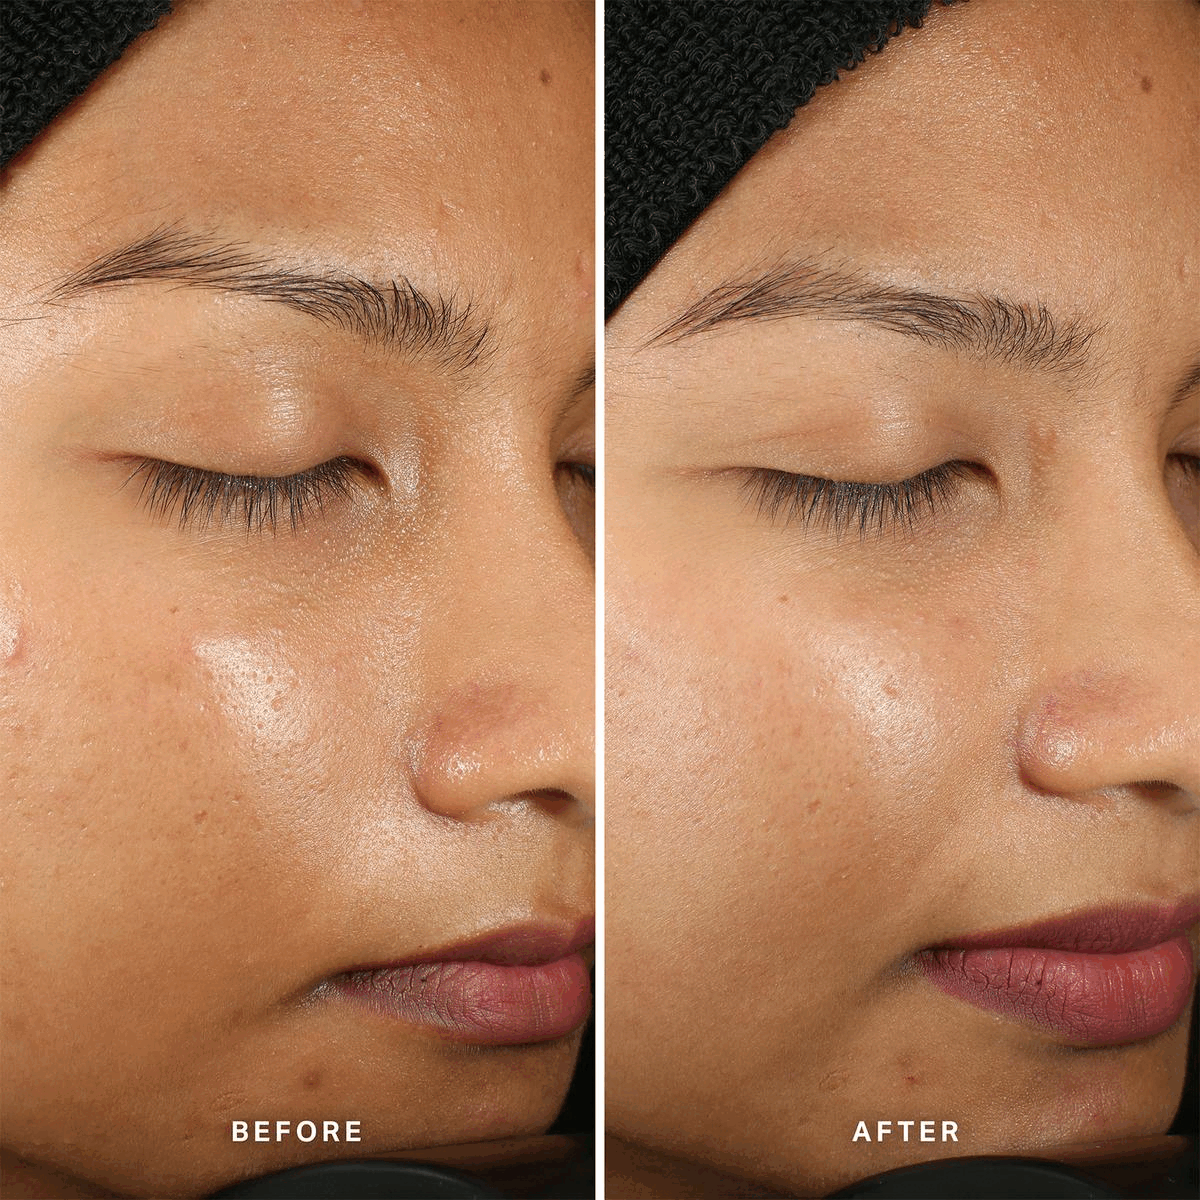 Two images transiting into each other in an endless loop. Image one: Text reads Before and After. Description - The before image shows skin before use. In the after image the skin appears smoother, clearer and skin is visibly luminous. Image two: Text reads Before and After. Description - The before image shows skin before usw. In the after image the skins redness has been reduced and appears smoother and calmer. 